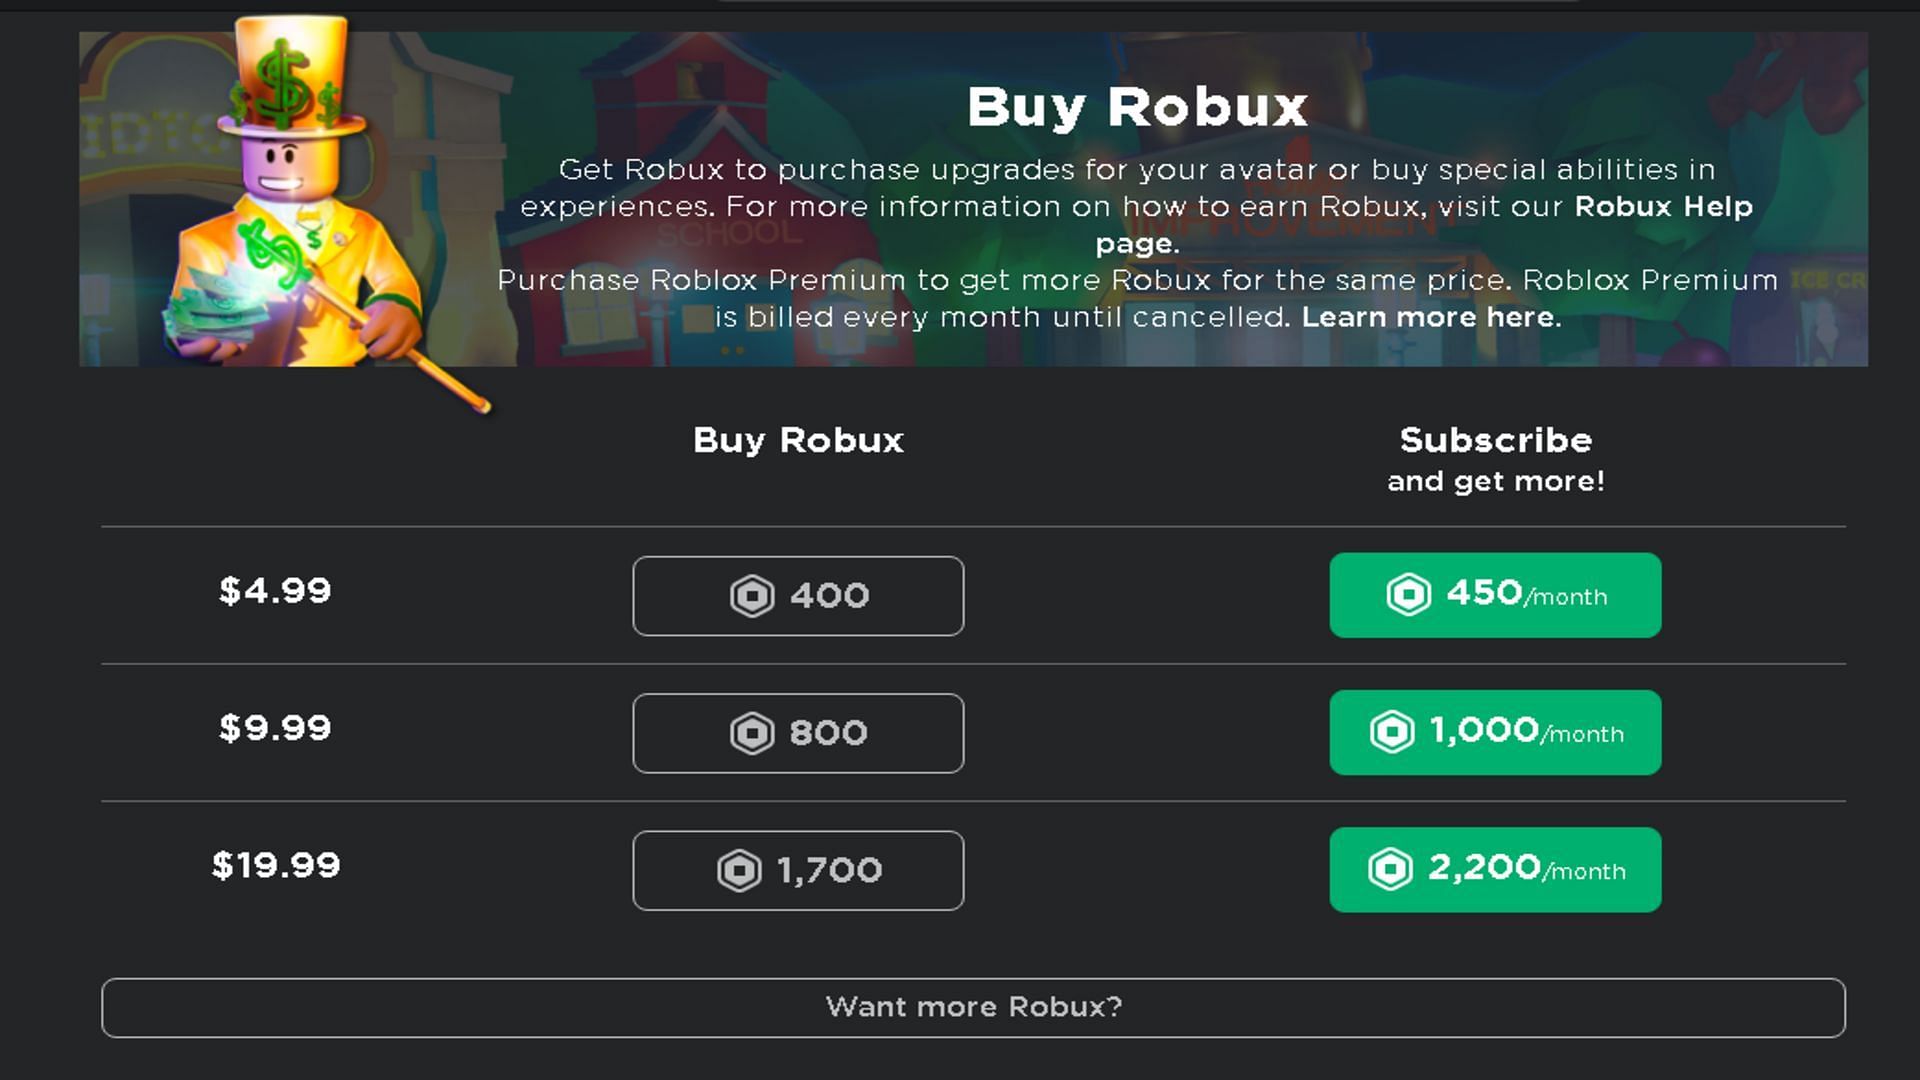 Only buy Robux from Roblox (Image via Roblox)